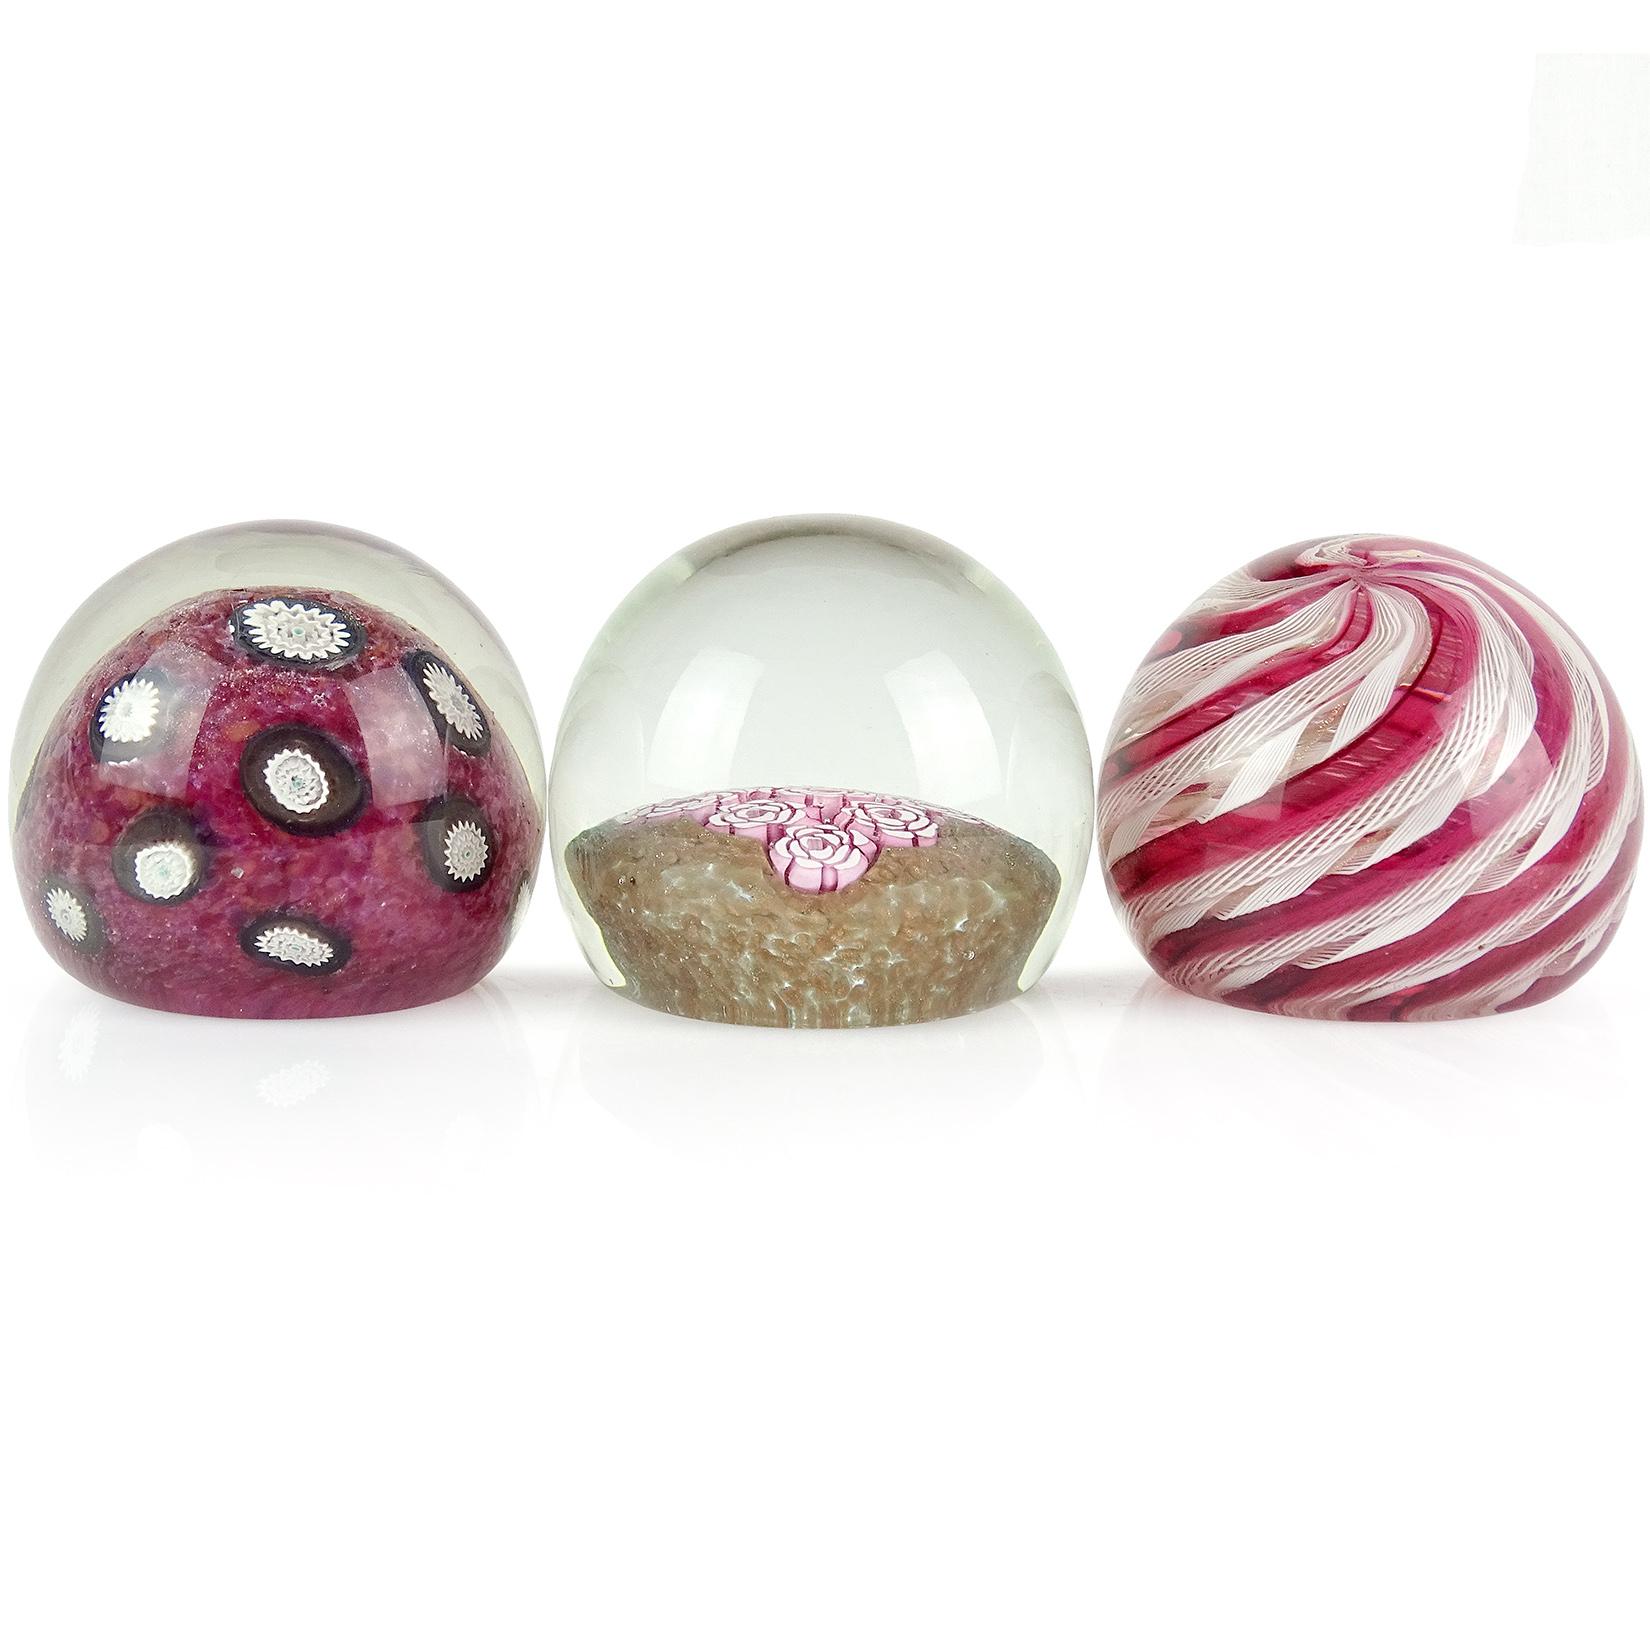 Priced per item. Beautiful Murano hand blown Italian art glass paperweights. Documented to the Fratelli Toso company. The first is a red dots ground with white and black millefiori flower pieces. Next, a white Zanfirico ribbons and clear red ribbons